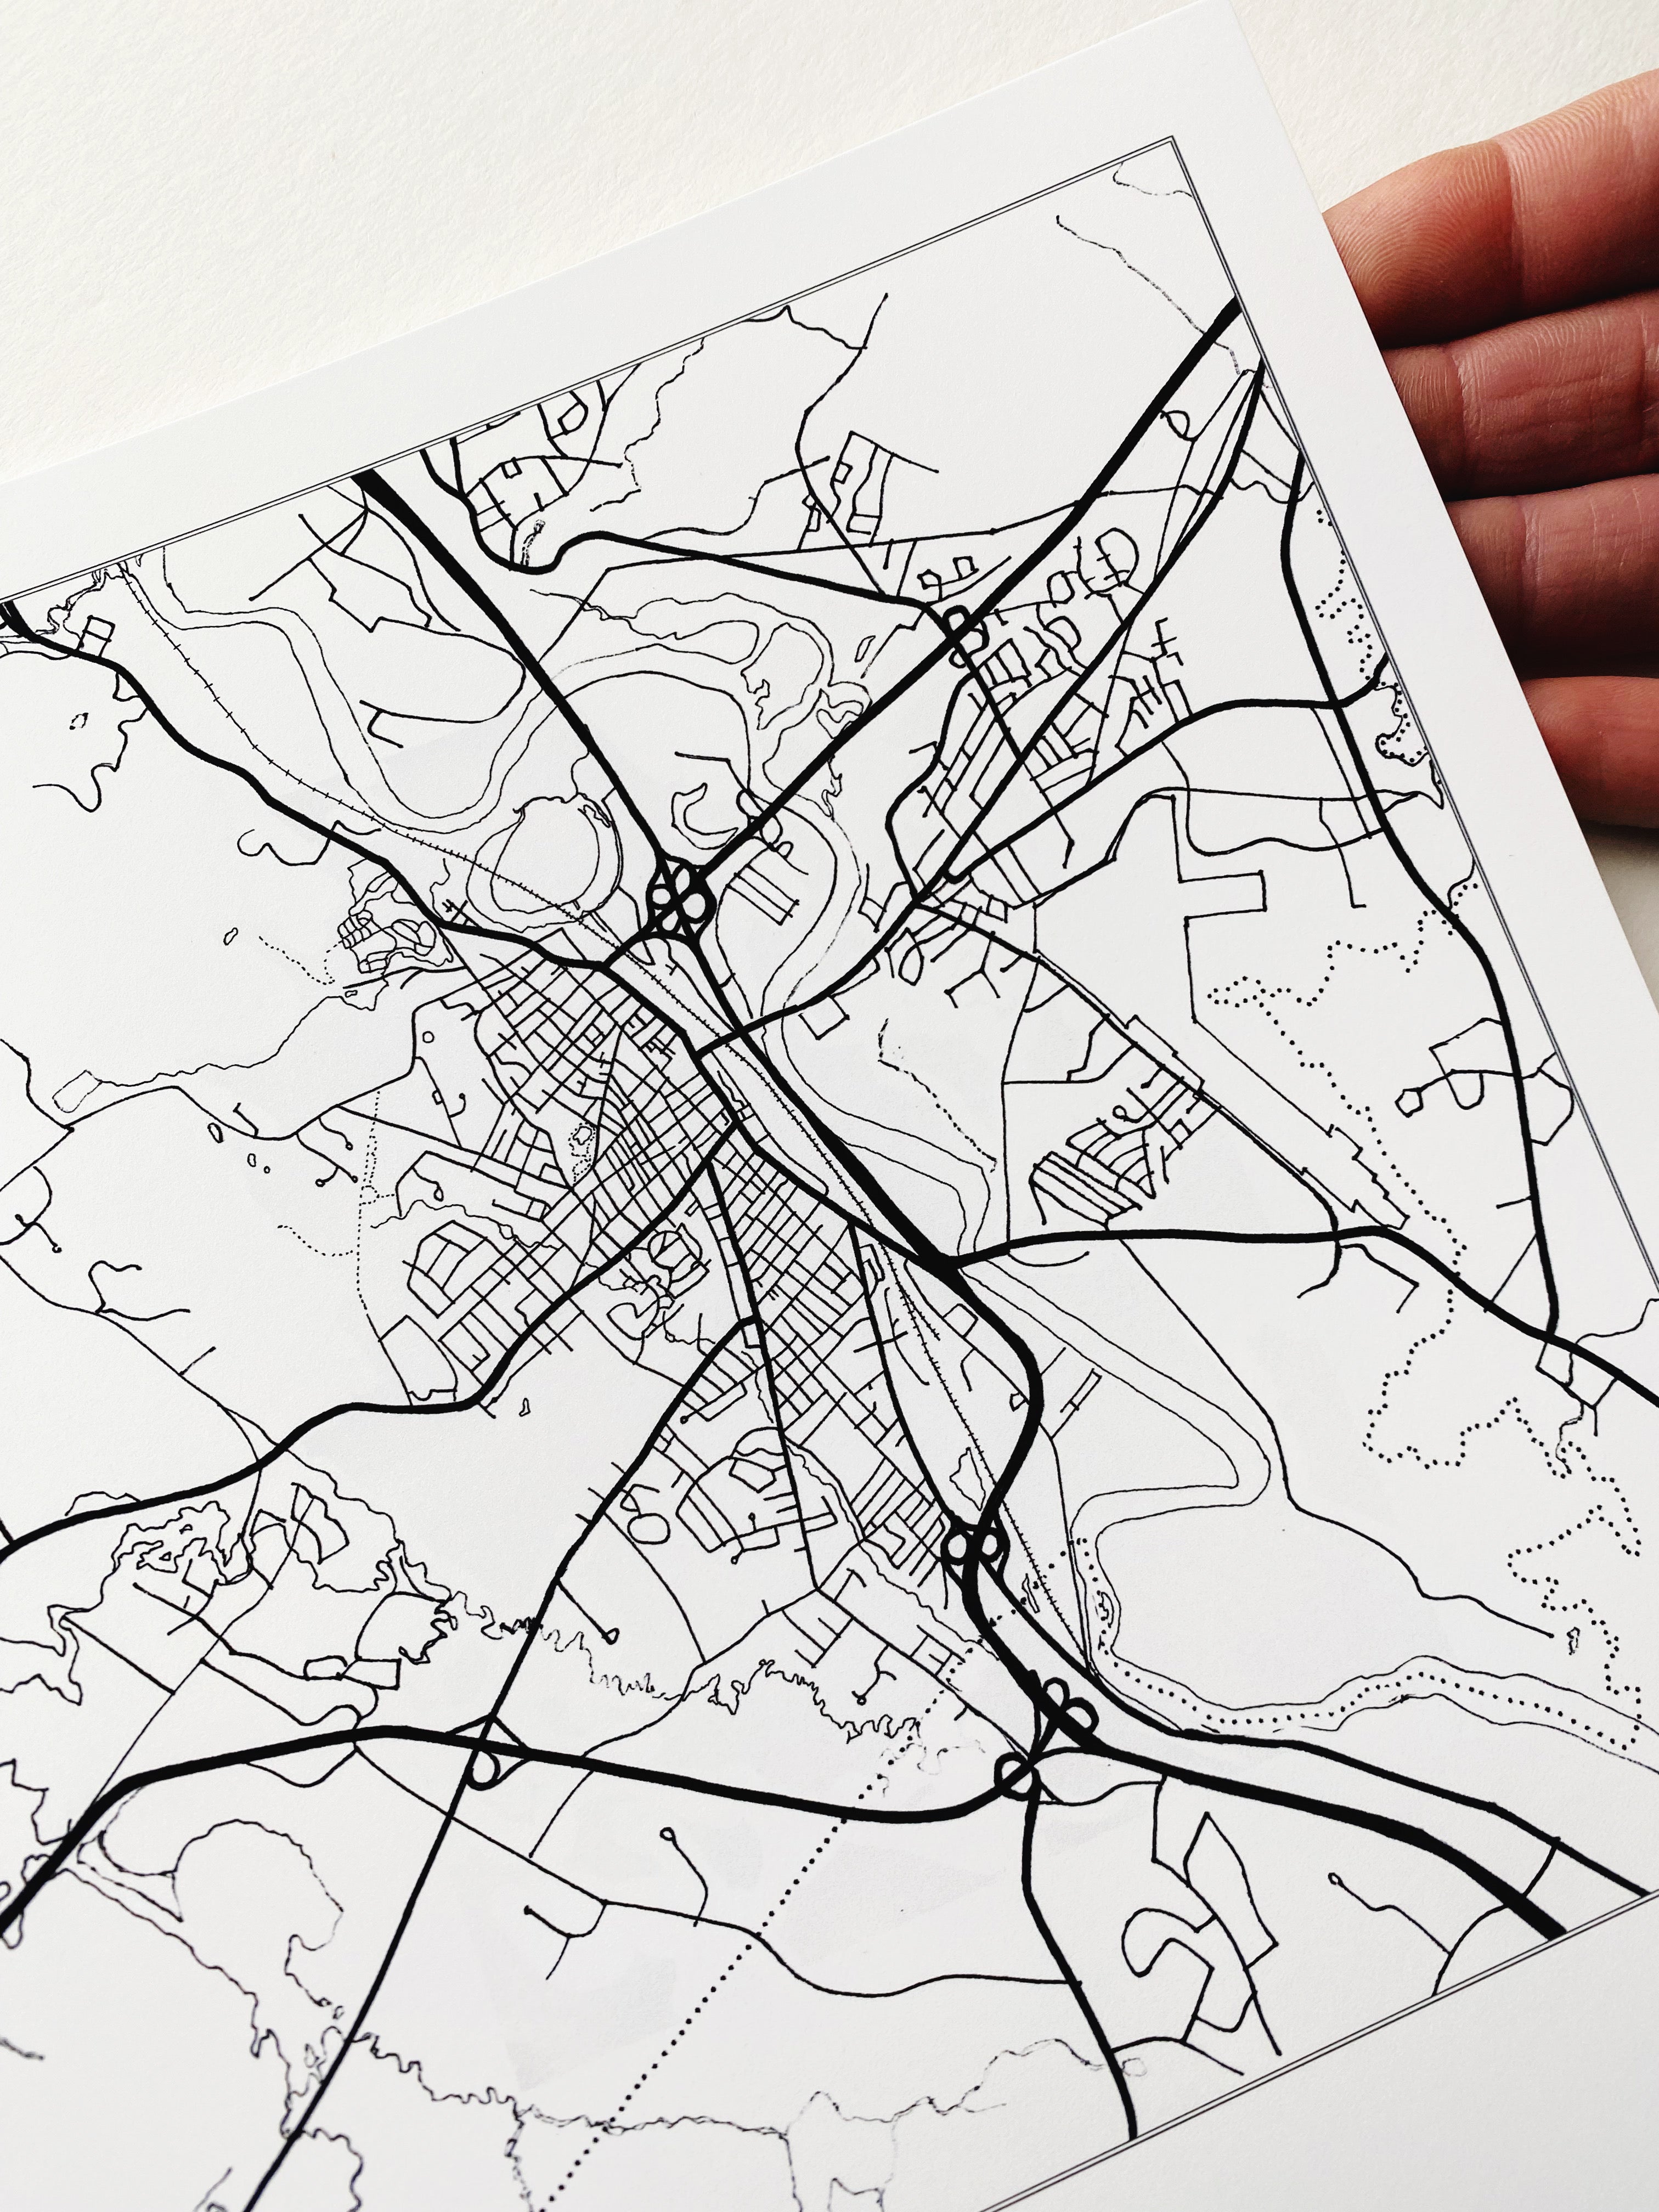 CONCORD New Hampshire City Lines Map: PRINT